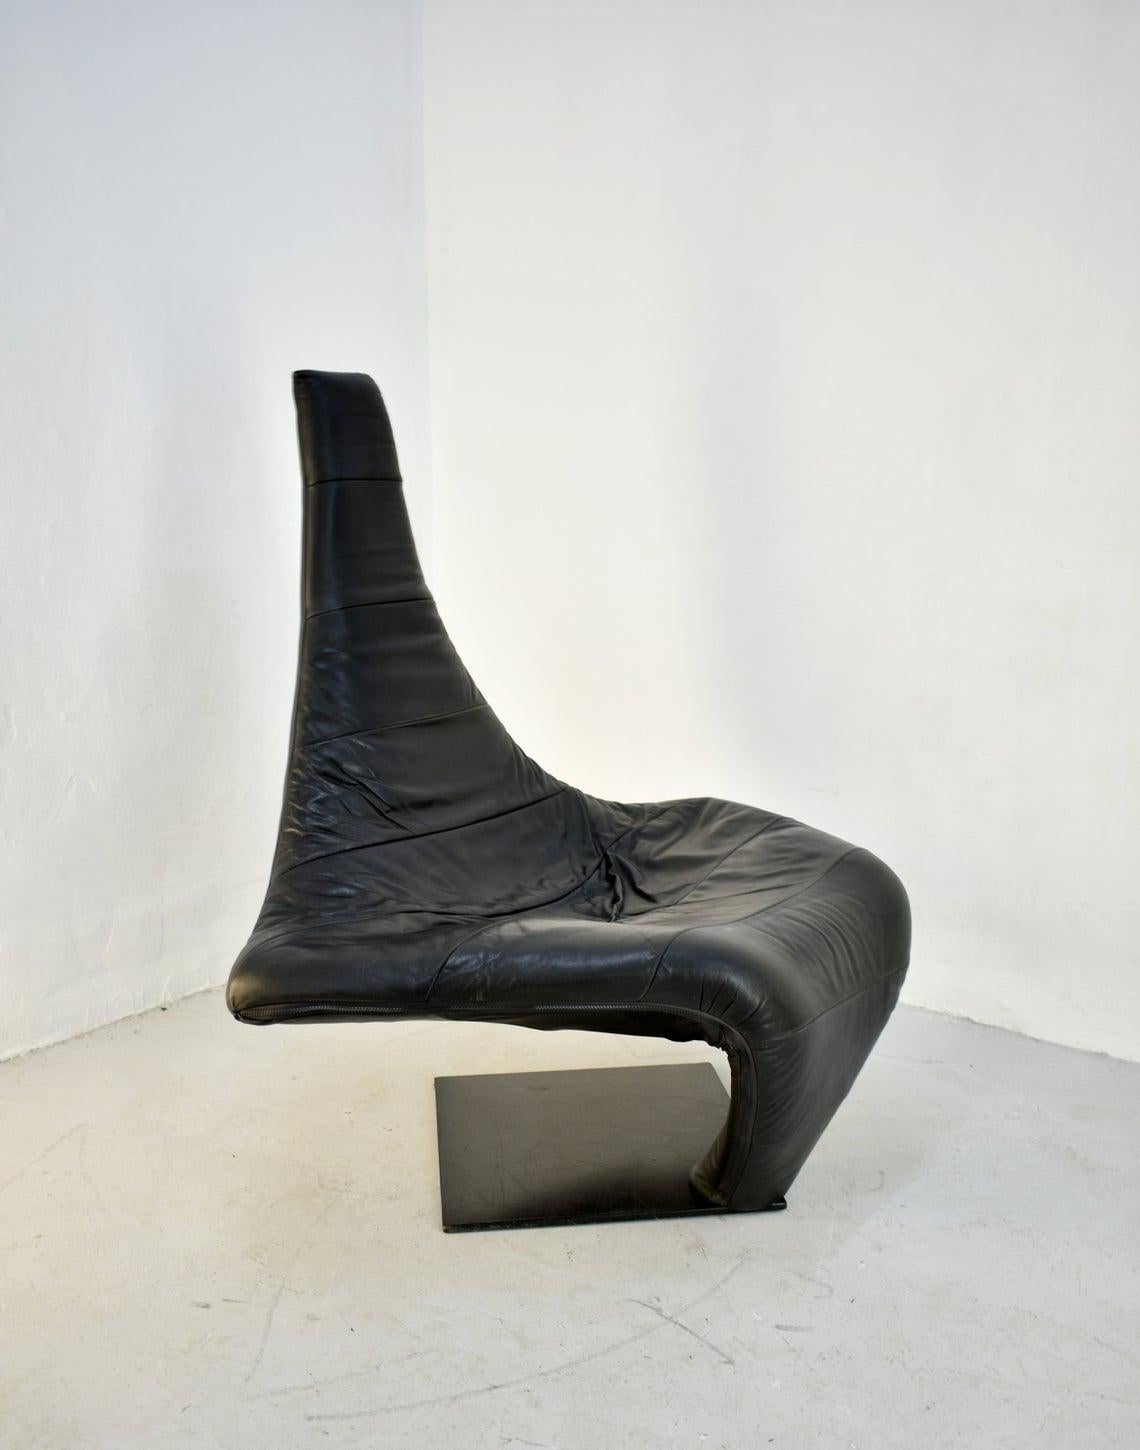 Late 20th Century Lounge Chair in Black Leather, Model 'Turner' by Jack Crebolder for Harvink